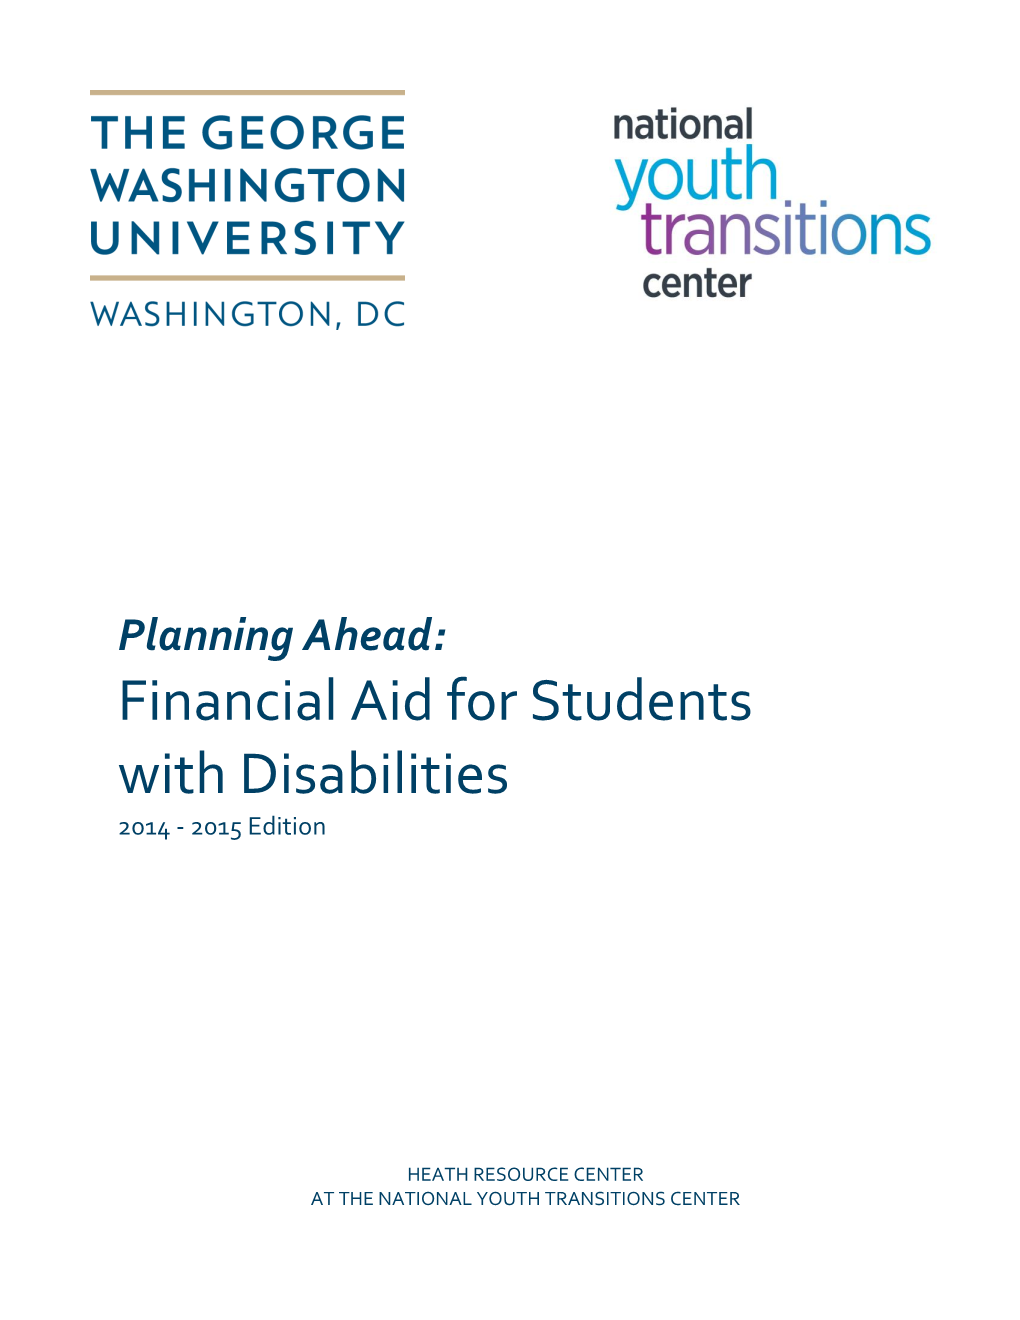 Planning Ahead: Financial Aid for Students with Disabilities 2014 - 2015 Edition